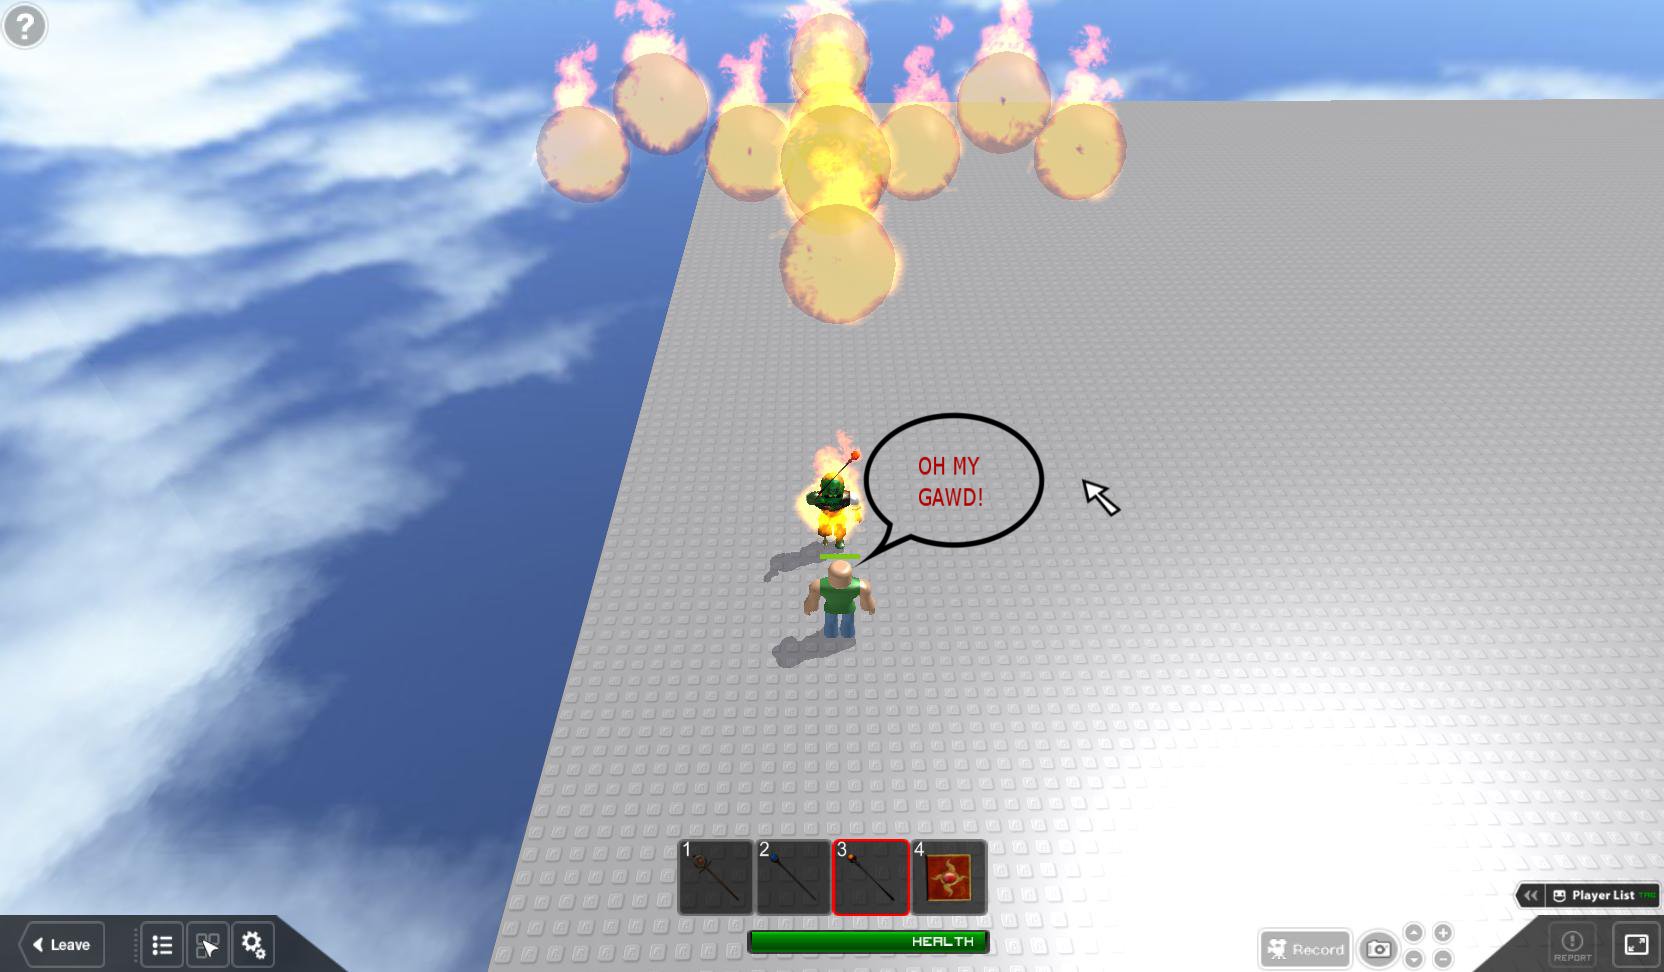 Wizard Tower Loot! - Roblox Blog